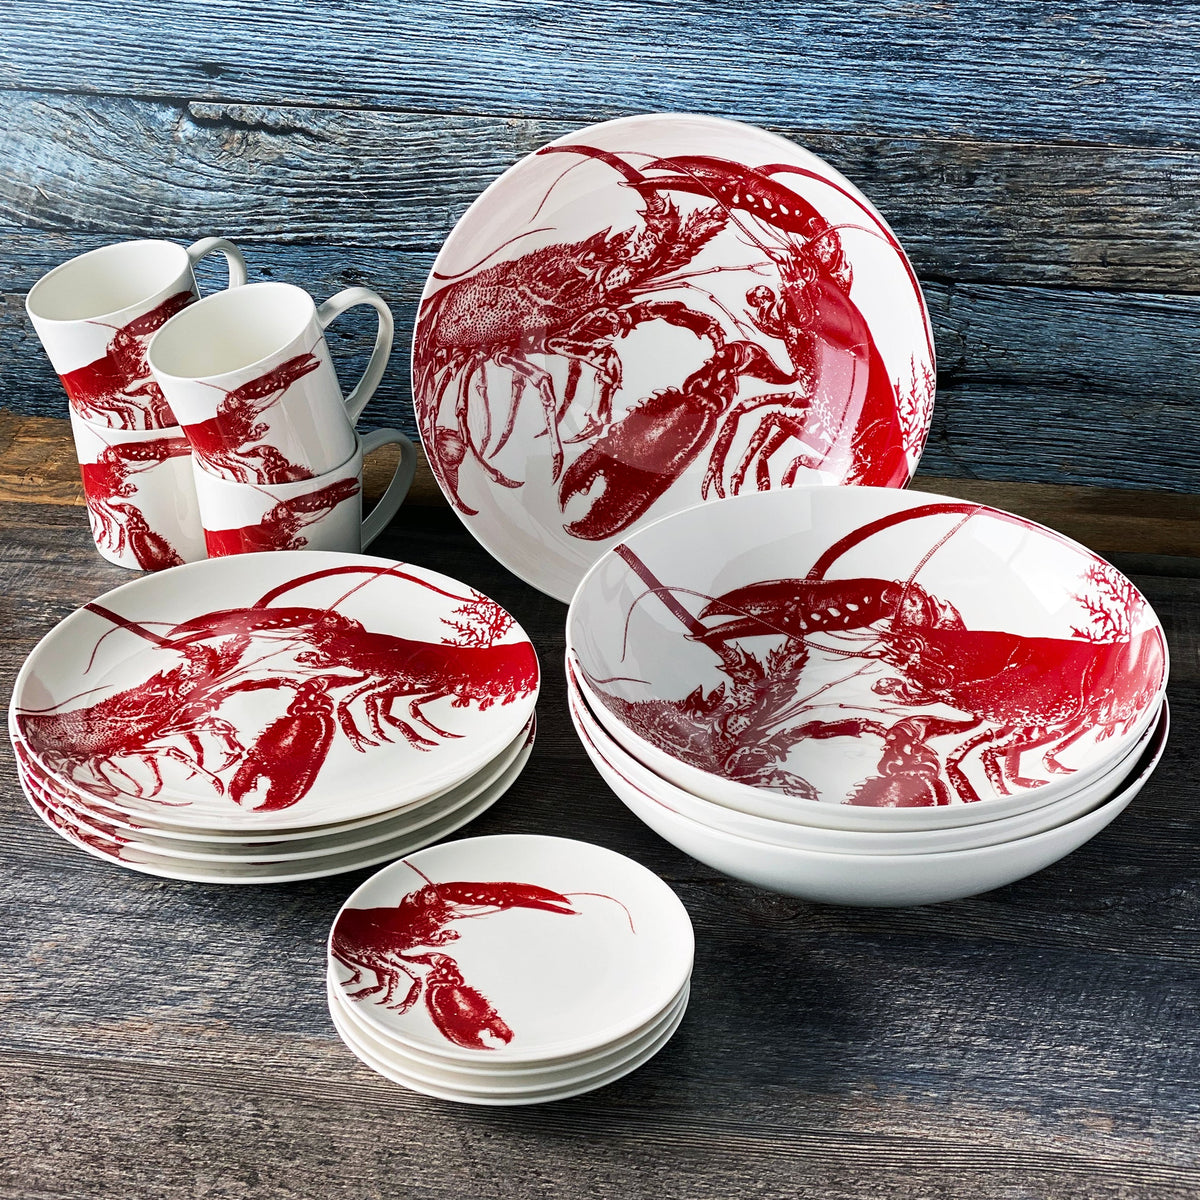 A set of Caskata Artisanal Home Complete Clambake 16 pc. Set lobster plates with lobsters and clam bakes on them.